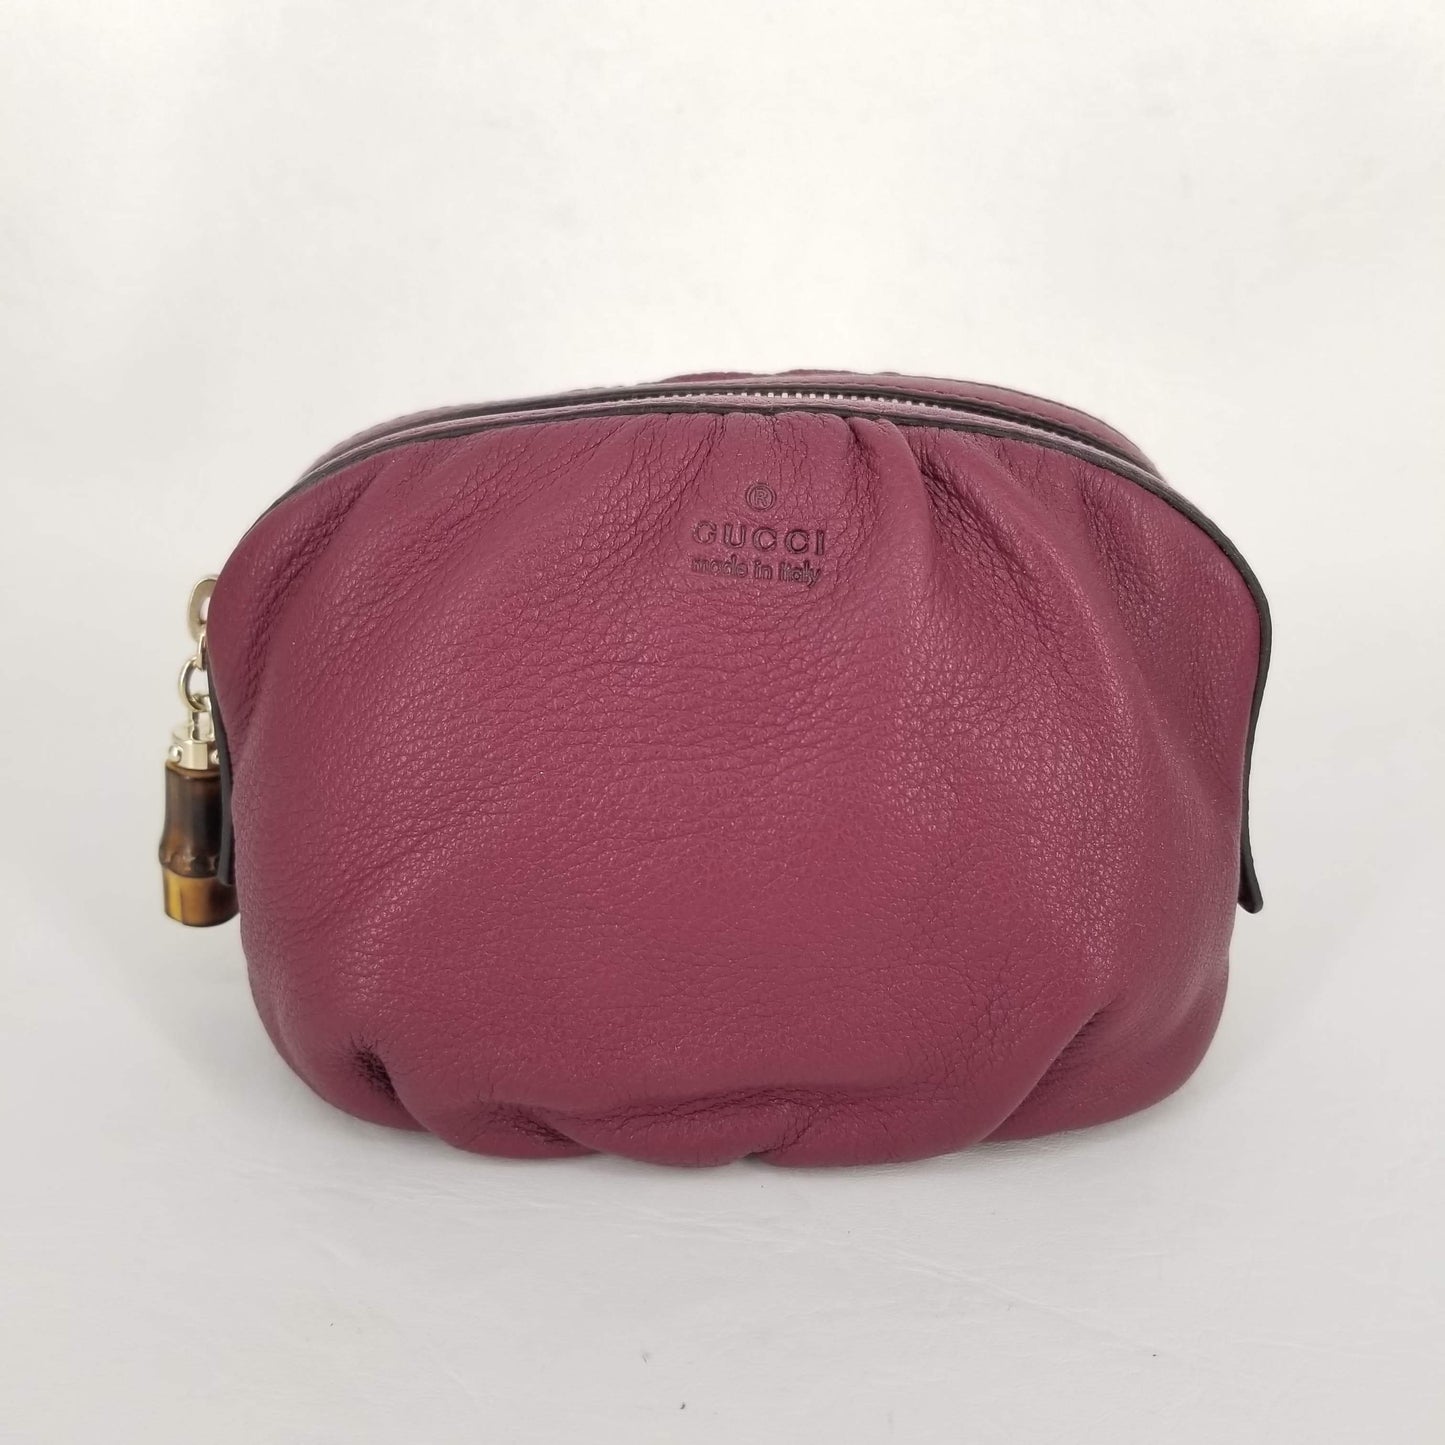 Authentic Gucci Plum Bamboo Leather Cosmetic Case